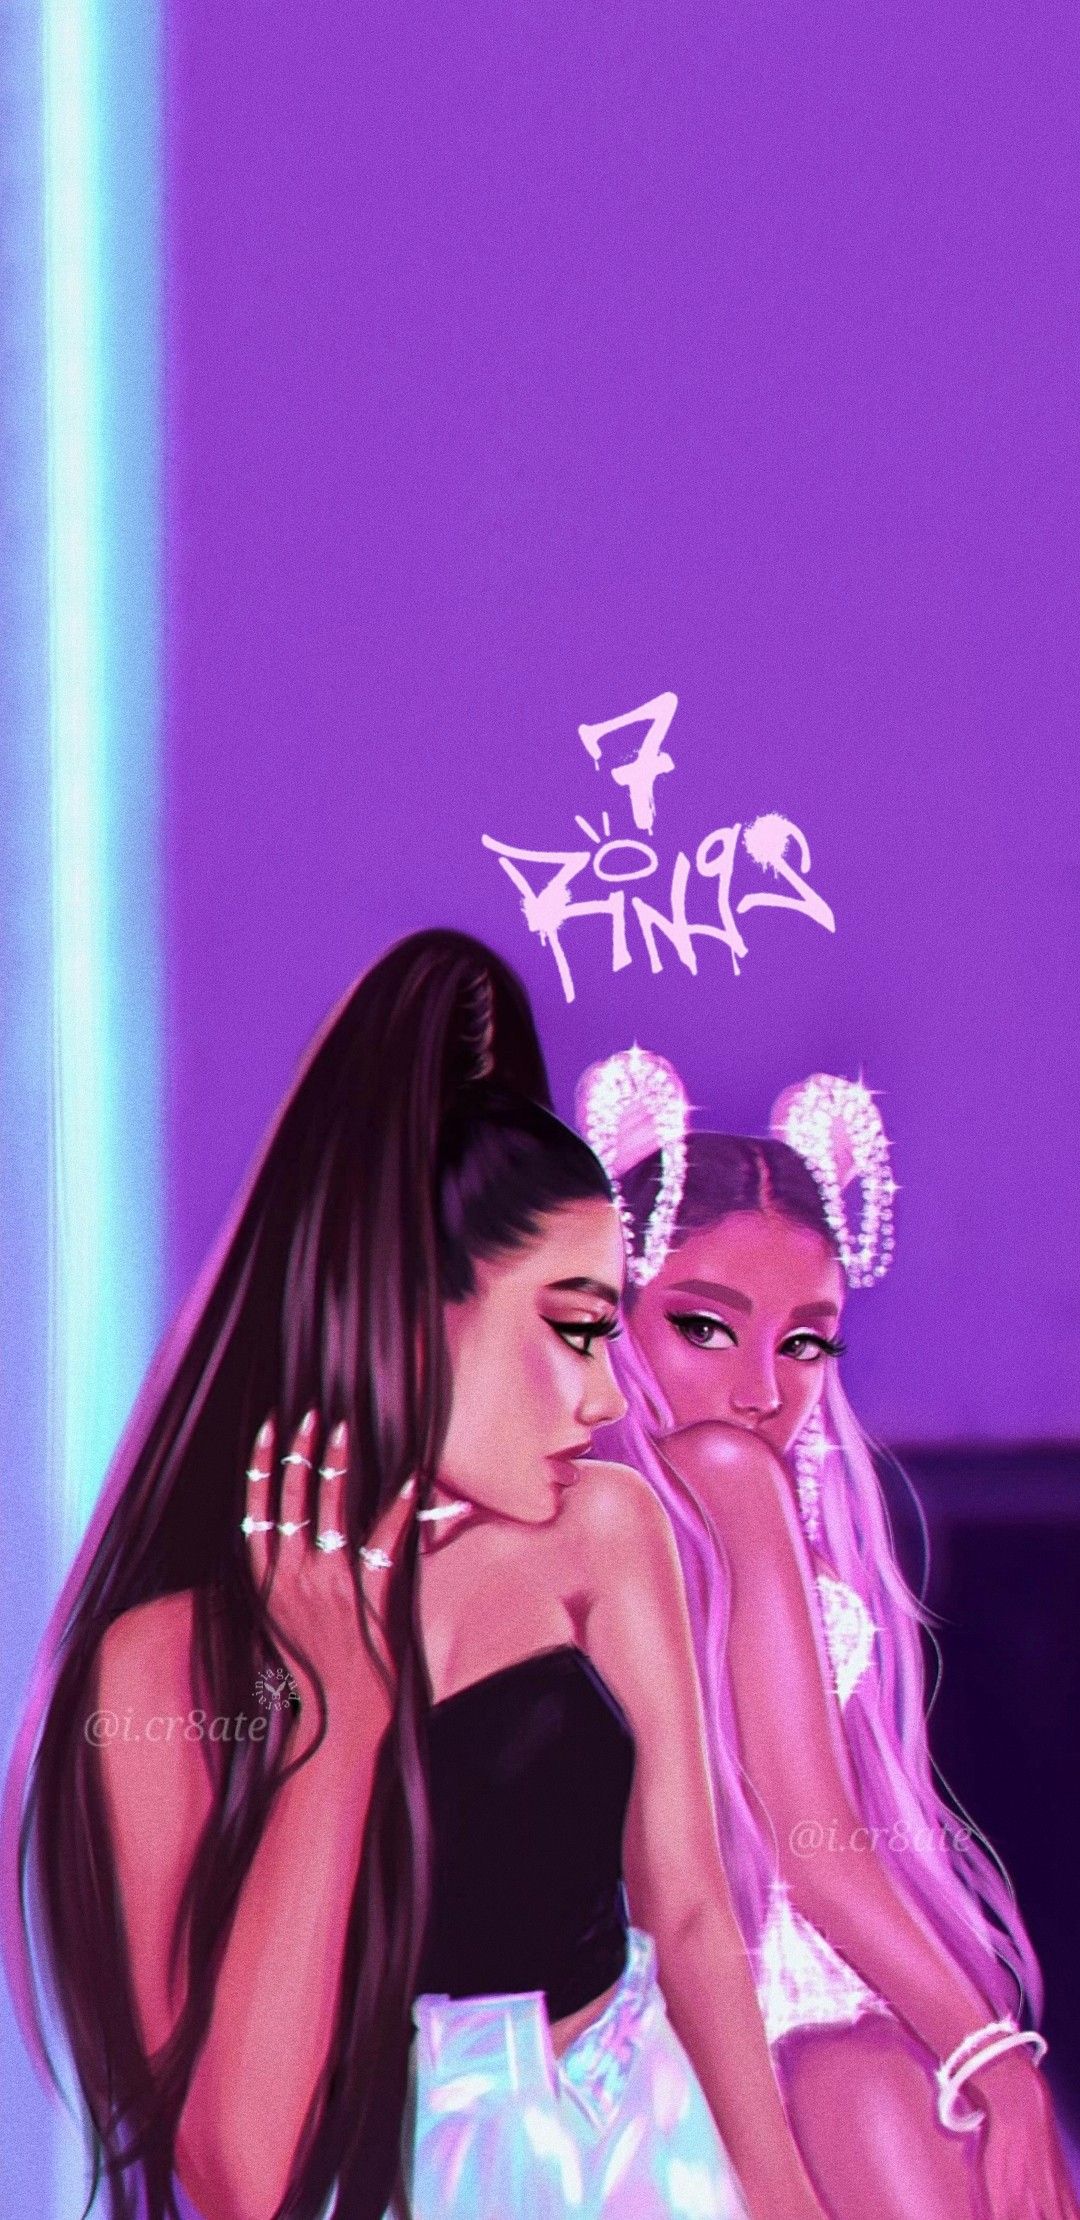 Free download ariana grande wallpapers 7 rings artist icr8ate on ig ...